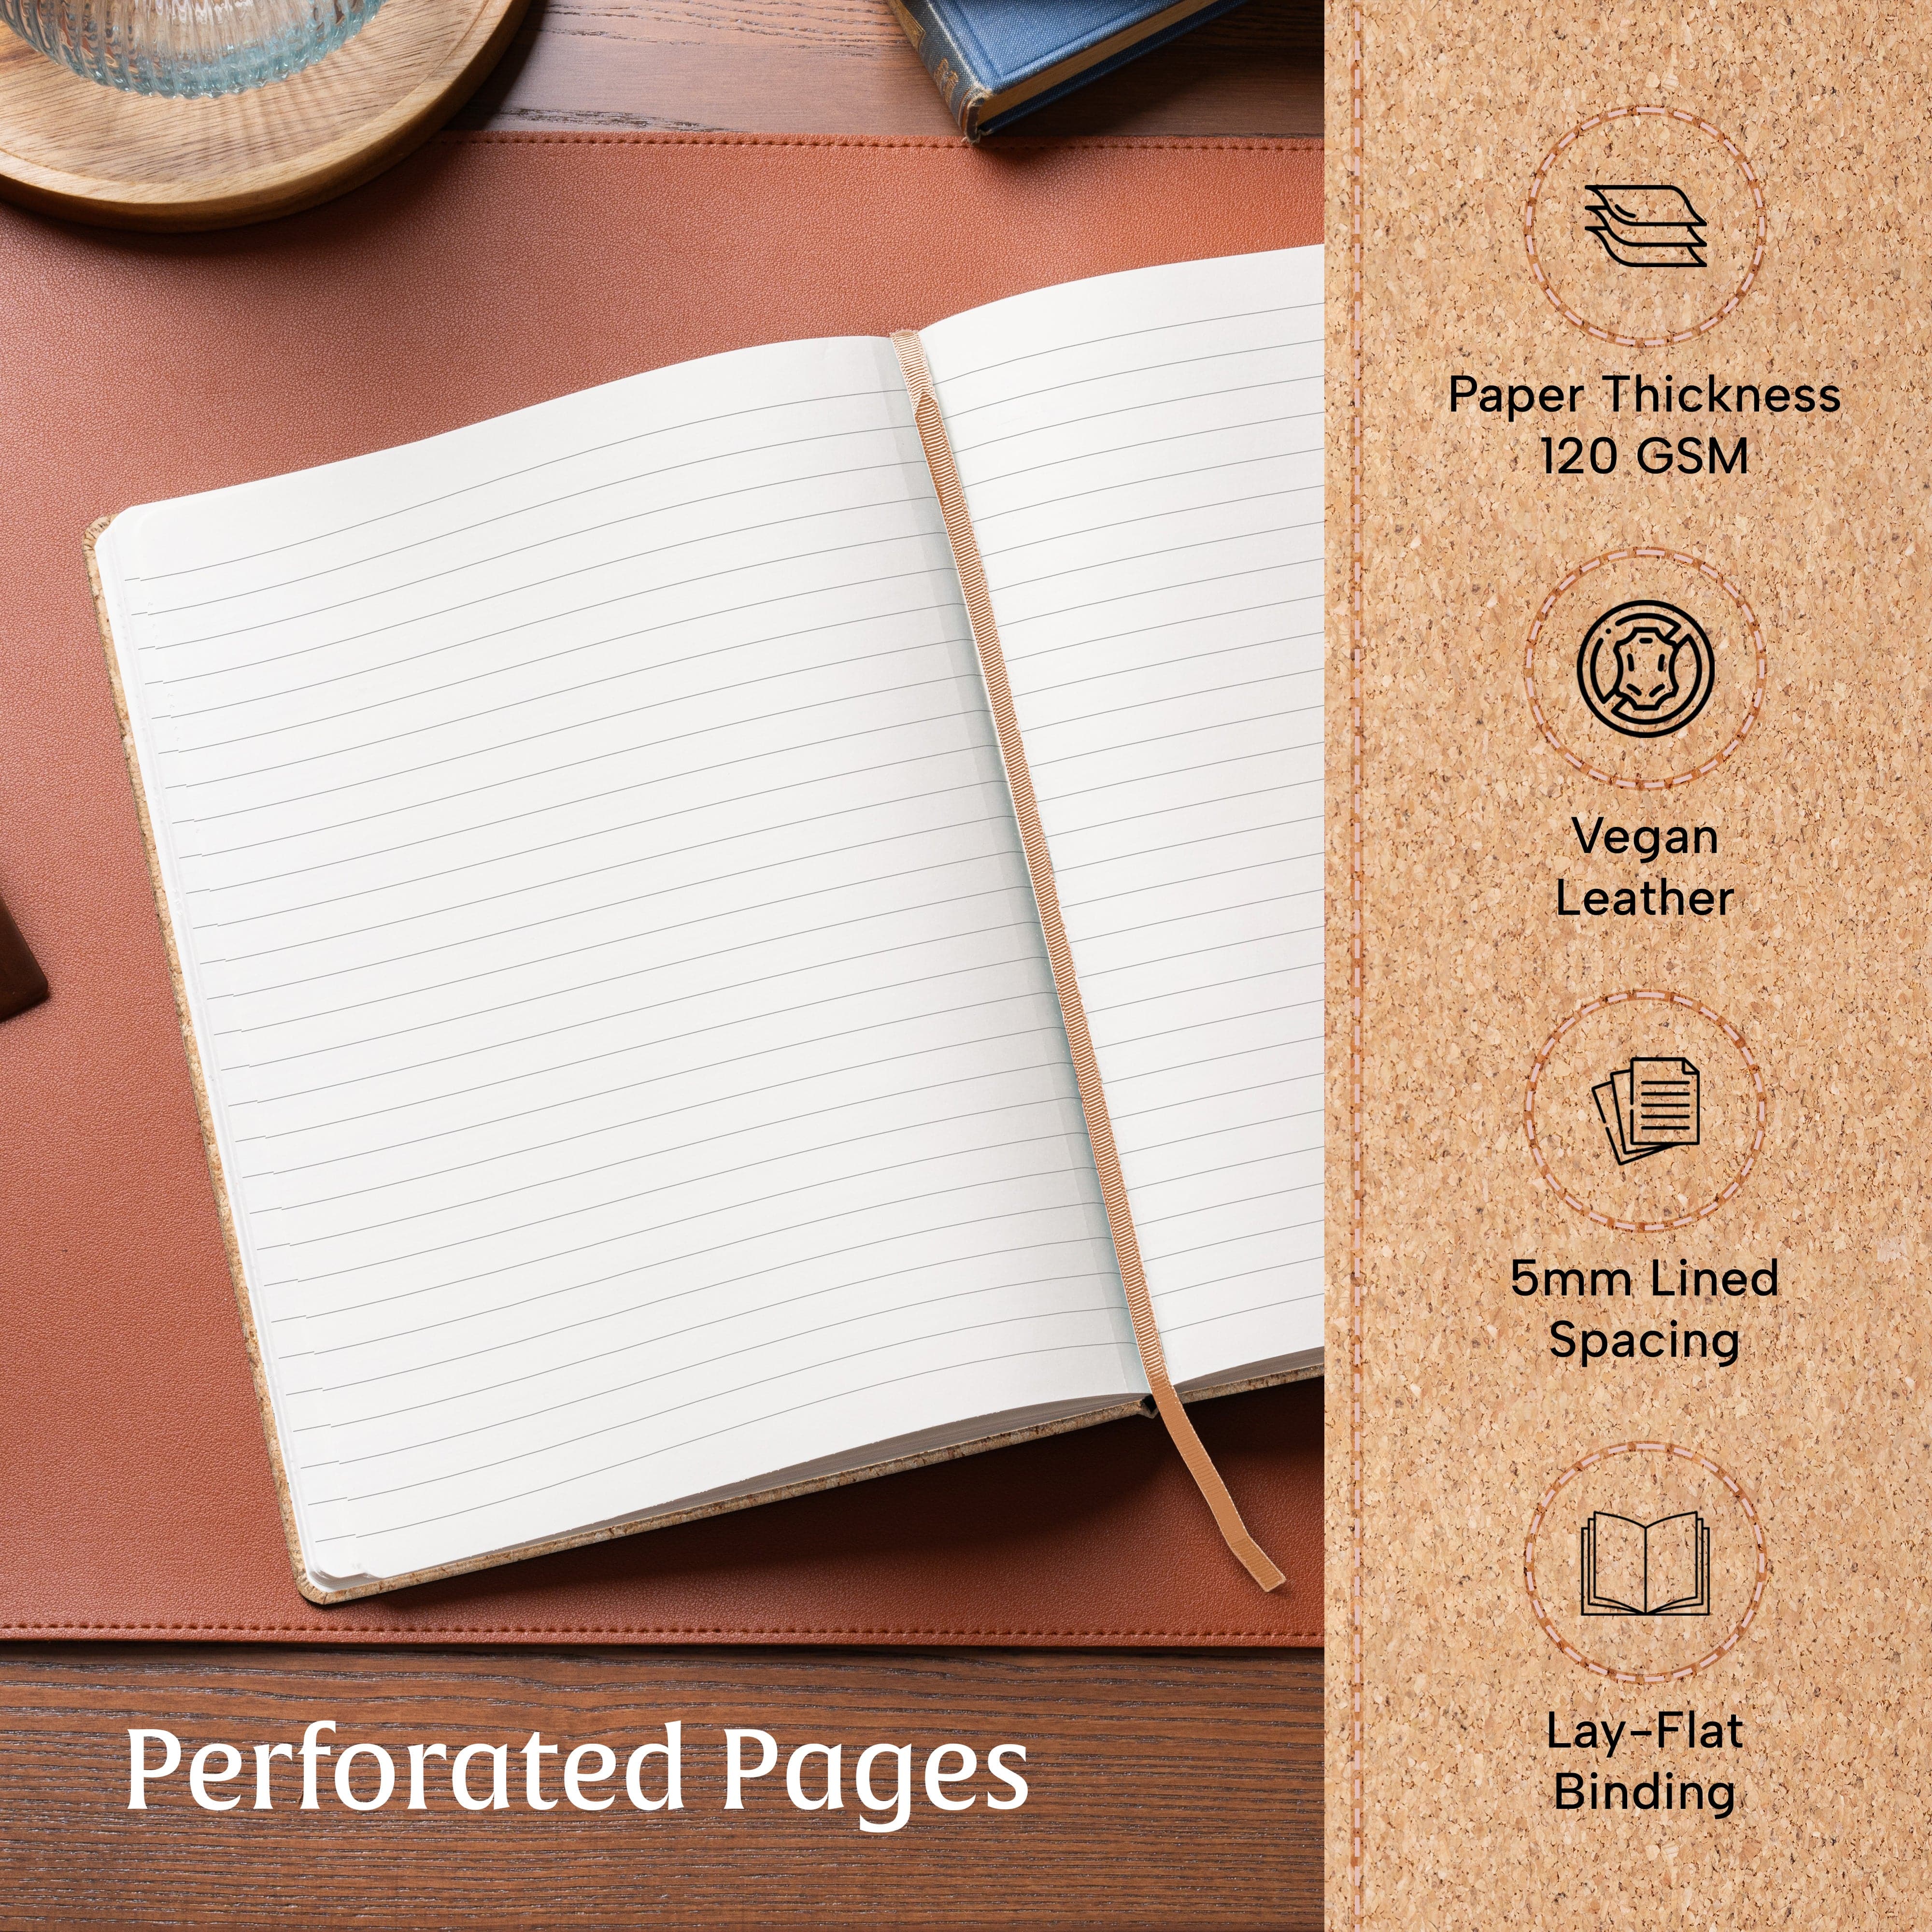 Beechmore's A4 Ruled Notebook in Beige Cork offers a unique tactile experience, with eco-friendly cover and methodically lined pages.